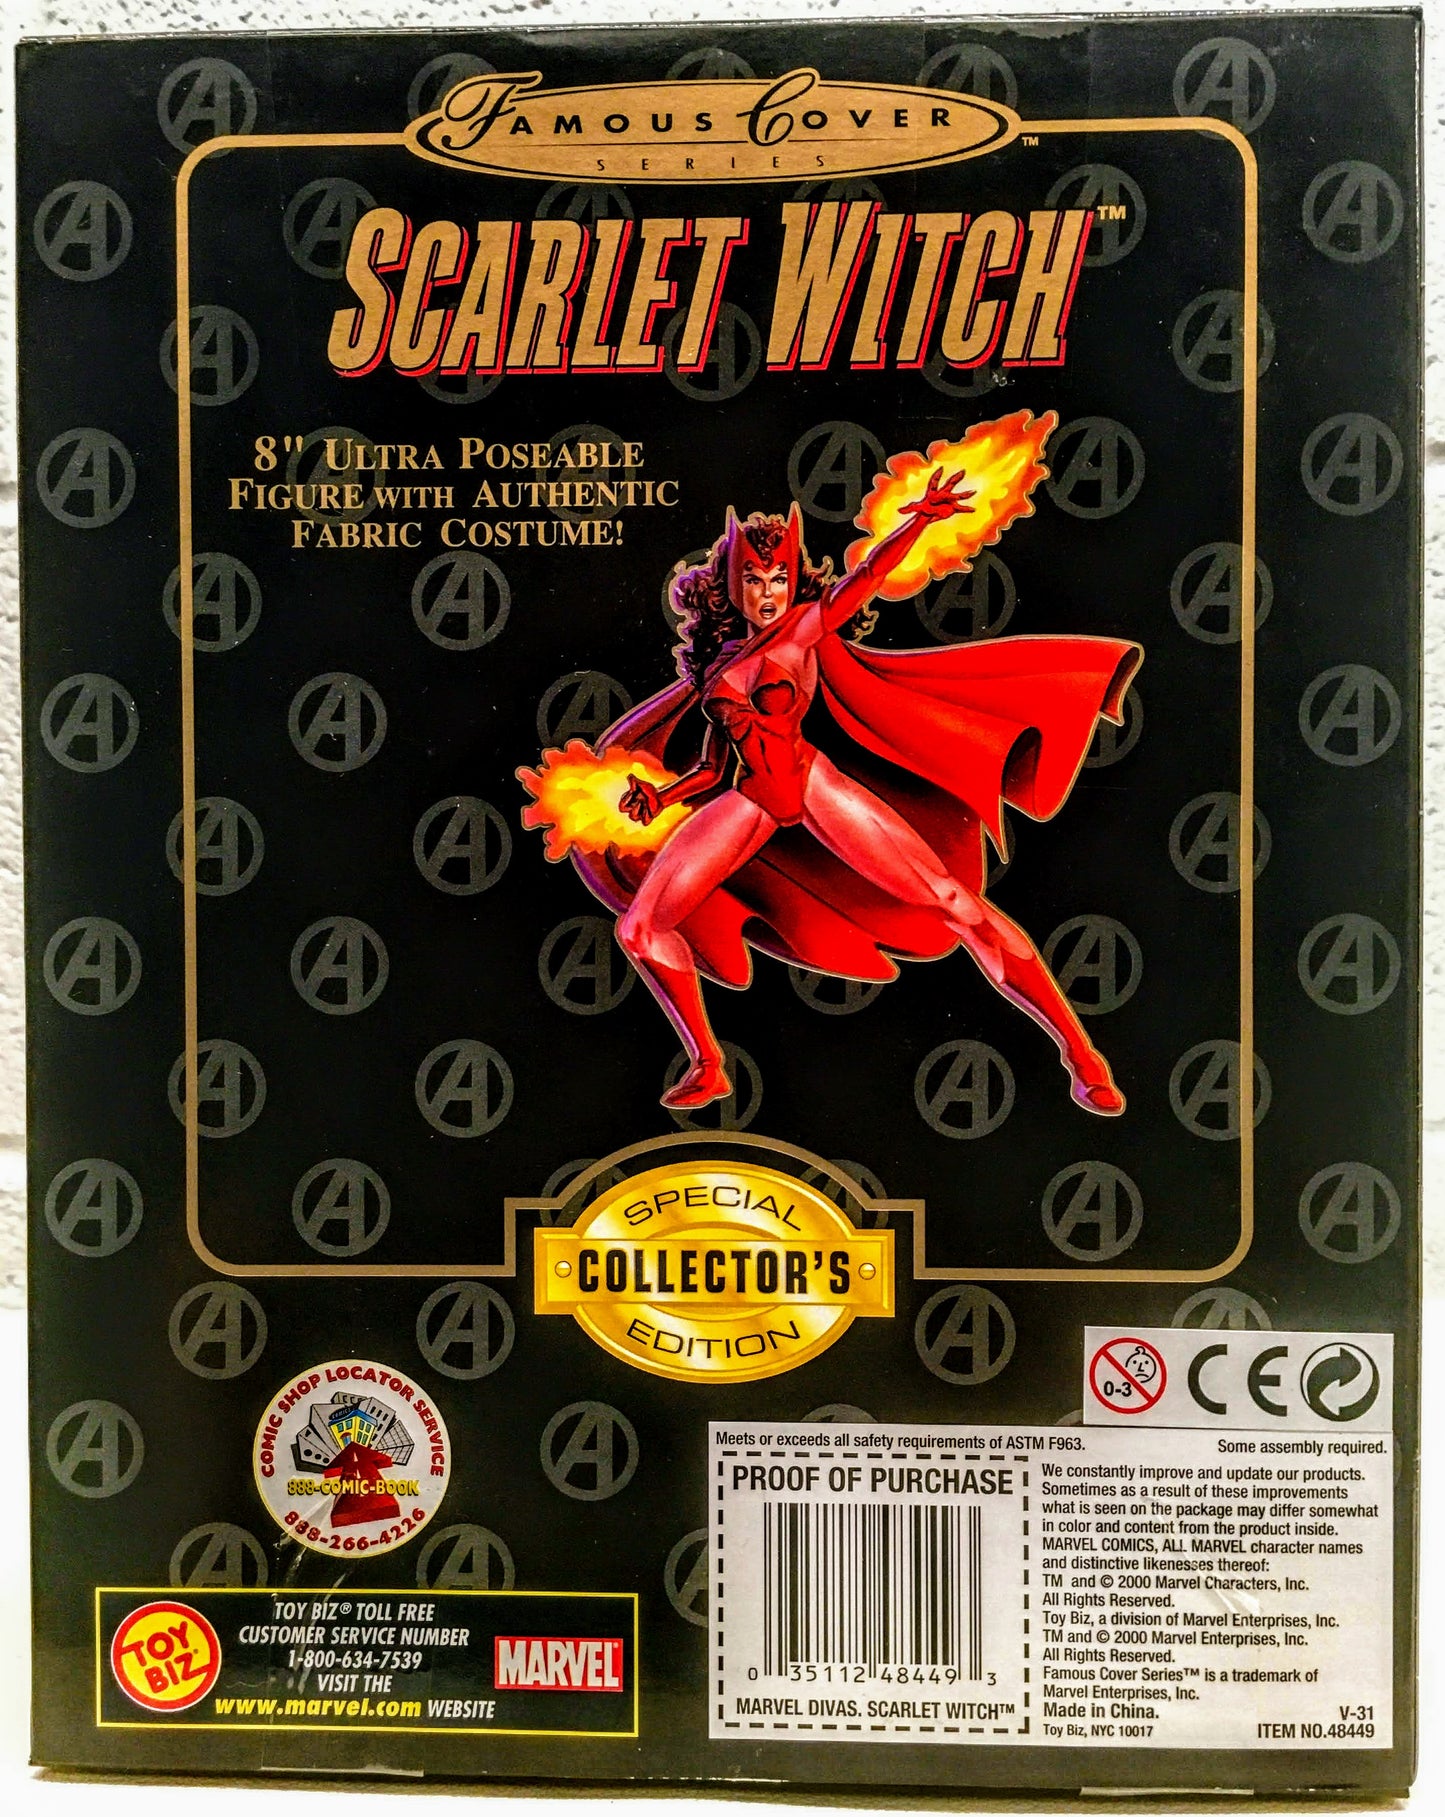 Famous Covers: Scarlet Witch